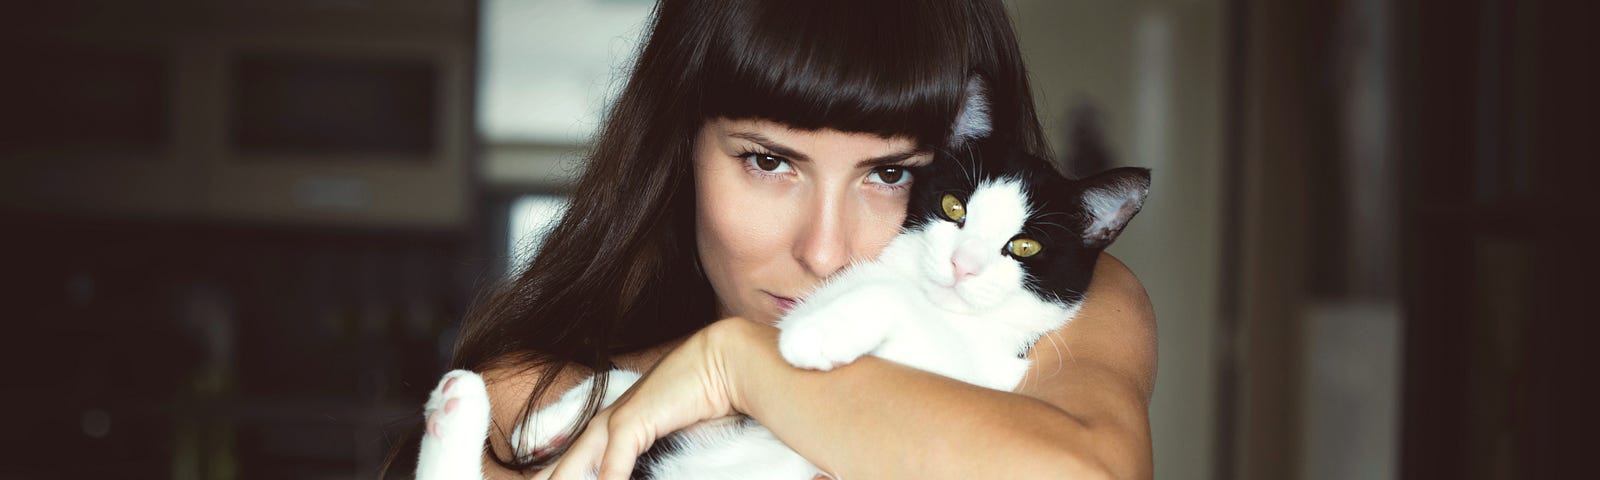 woman in bedroom holding a cat